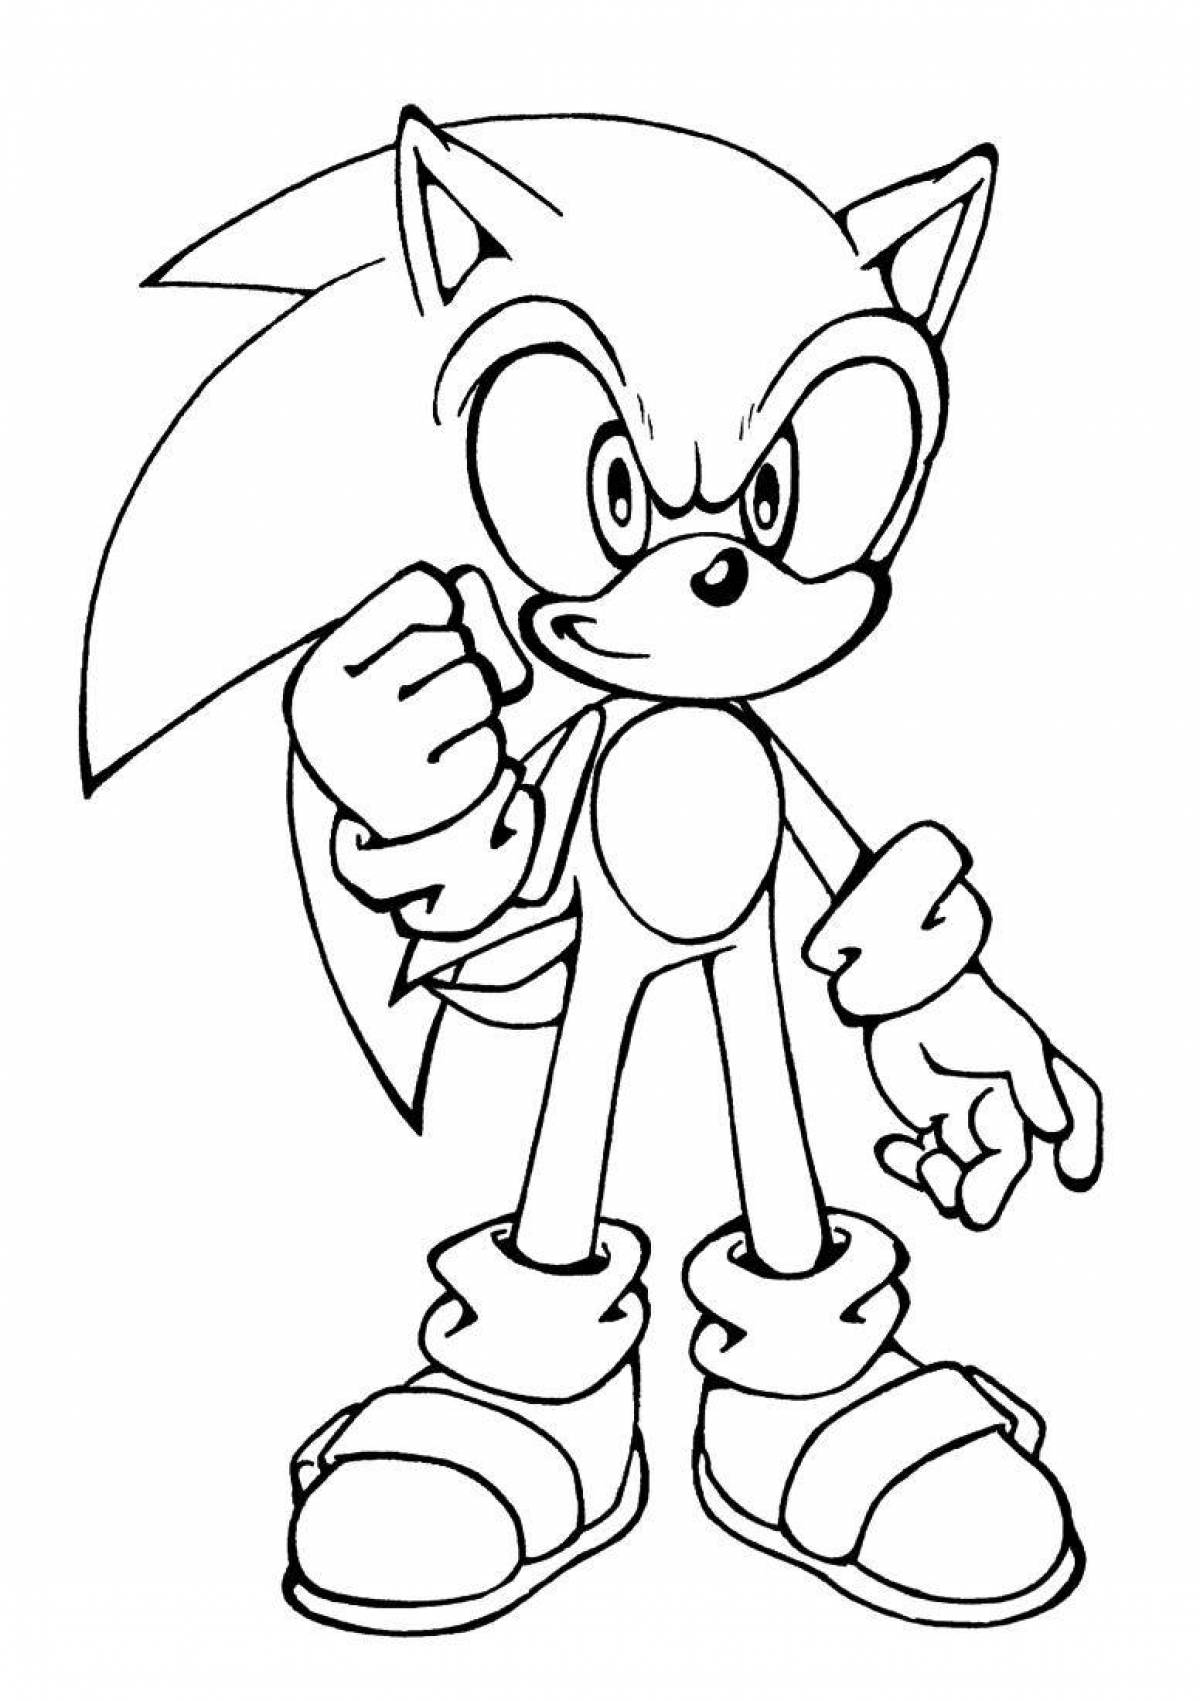 Dazzling sonic coloring book for boys